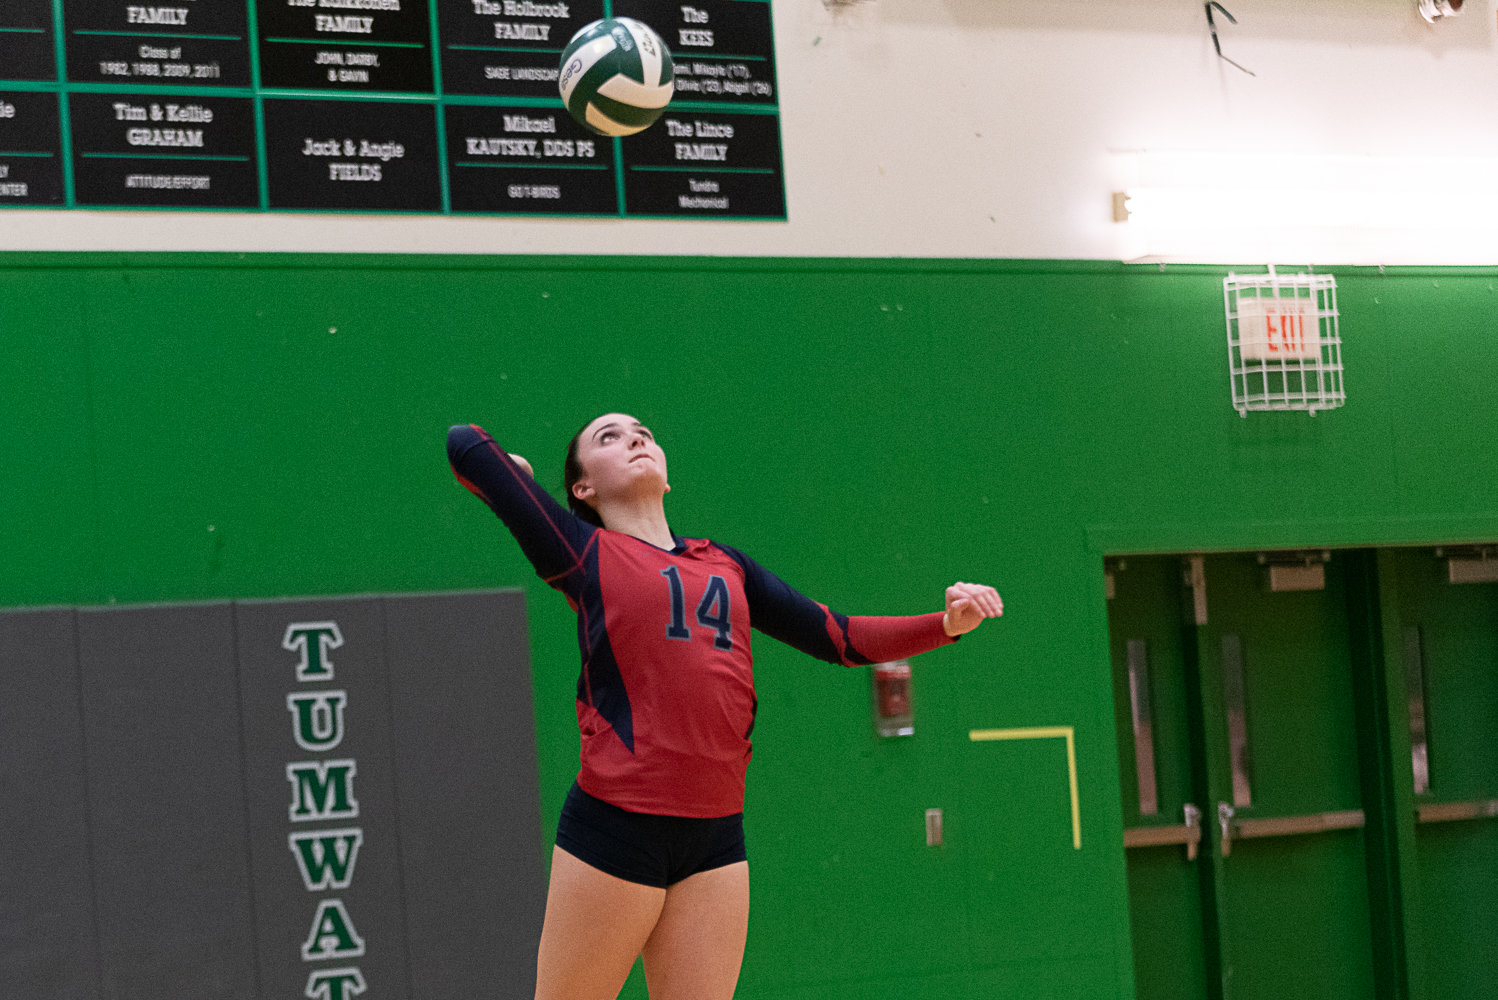 Alex Loveless fires off a serve during the first set of Black Hills' five-set loss to Tumwater on Oct. 11.